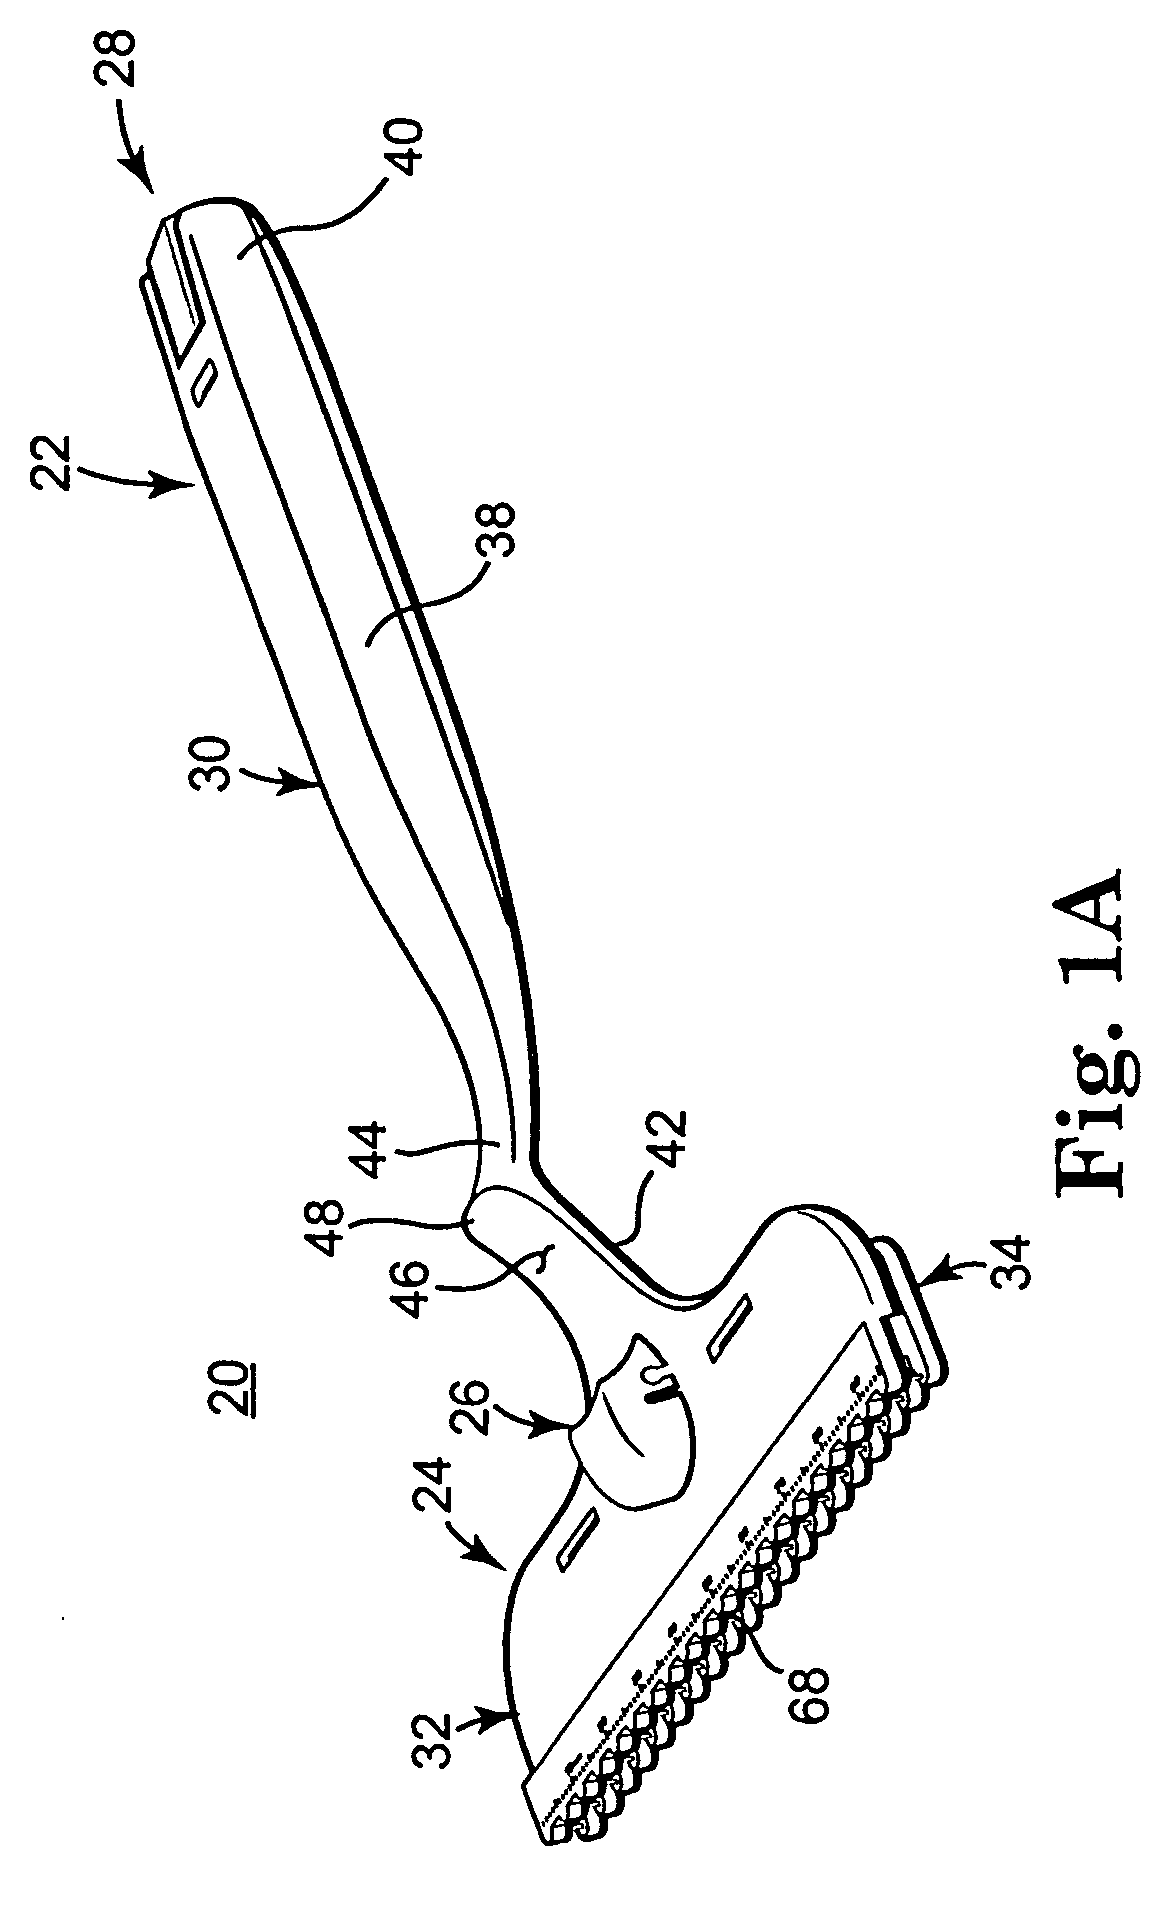 Method of implanting an annuloplasty prosthesis